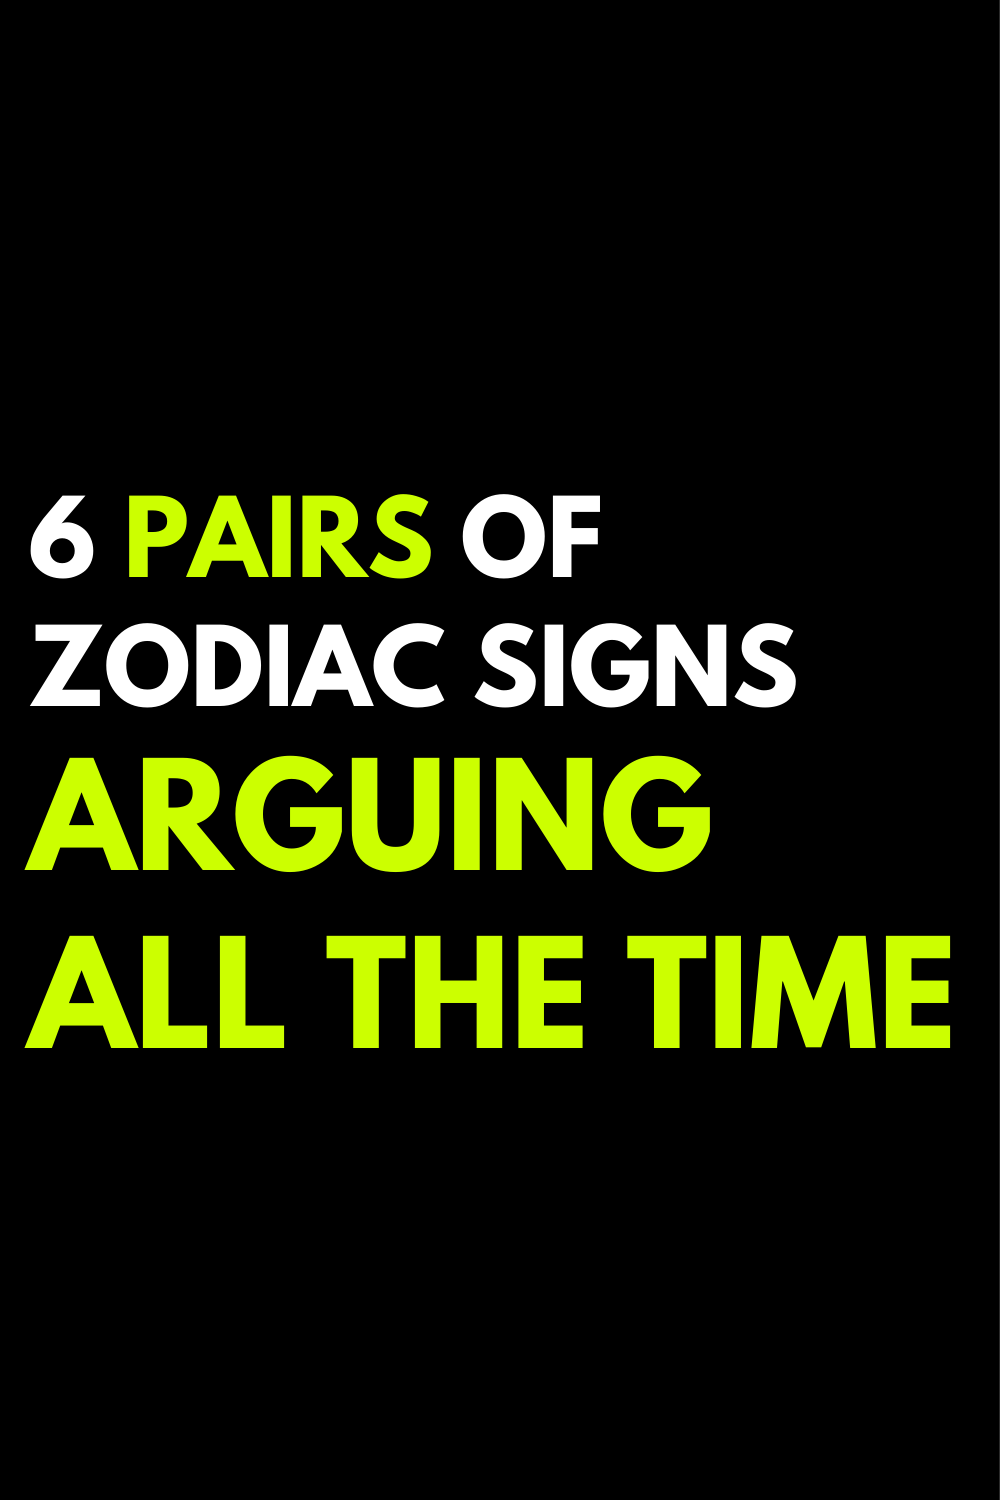 6 pairs of zodiac signs arguing all the time